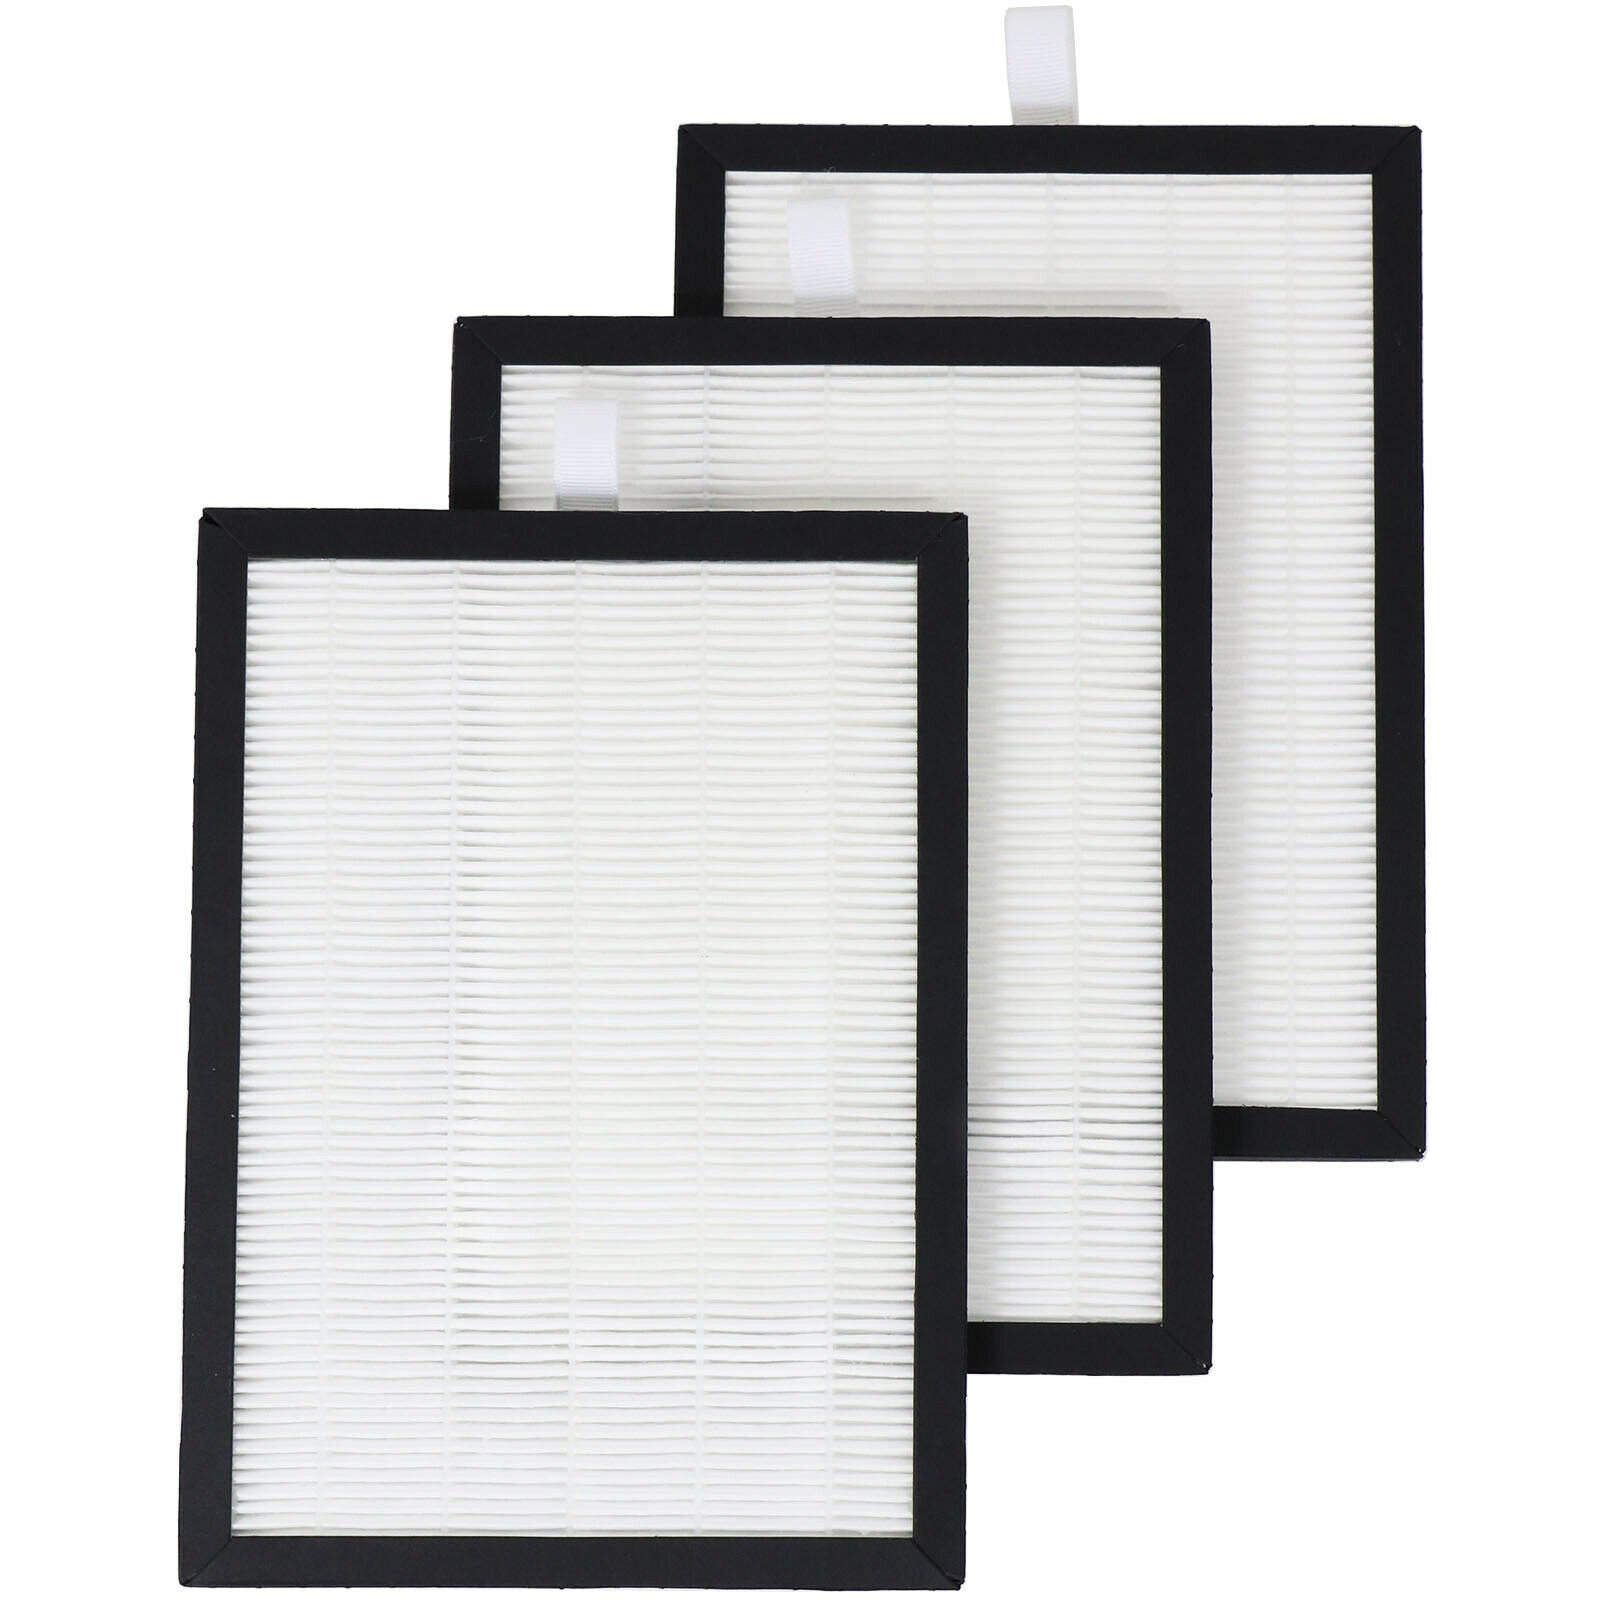 HEPA Filter for MEACO Dehumidifier 12L 12LE Low Energy Platinum 3 x Filters